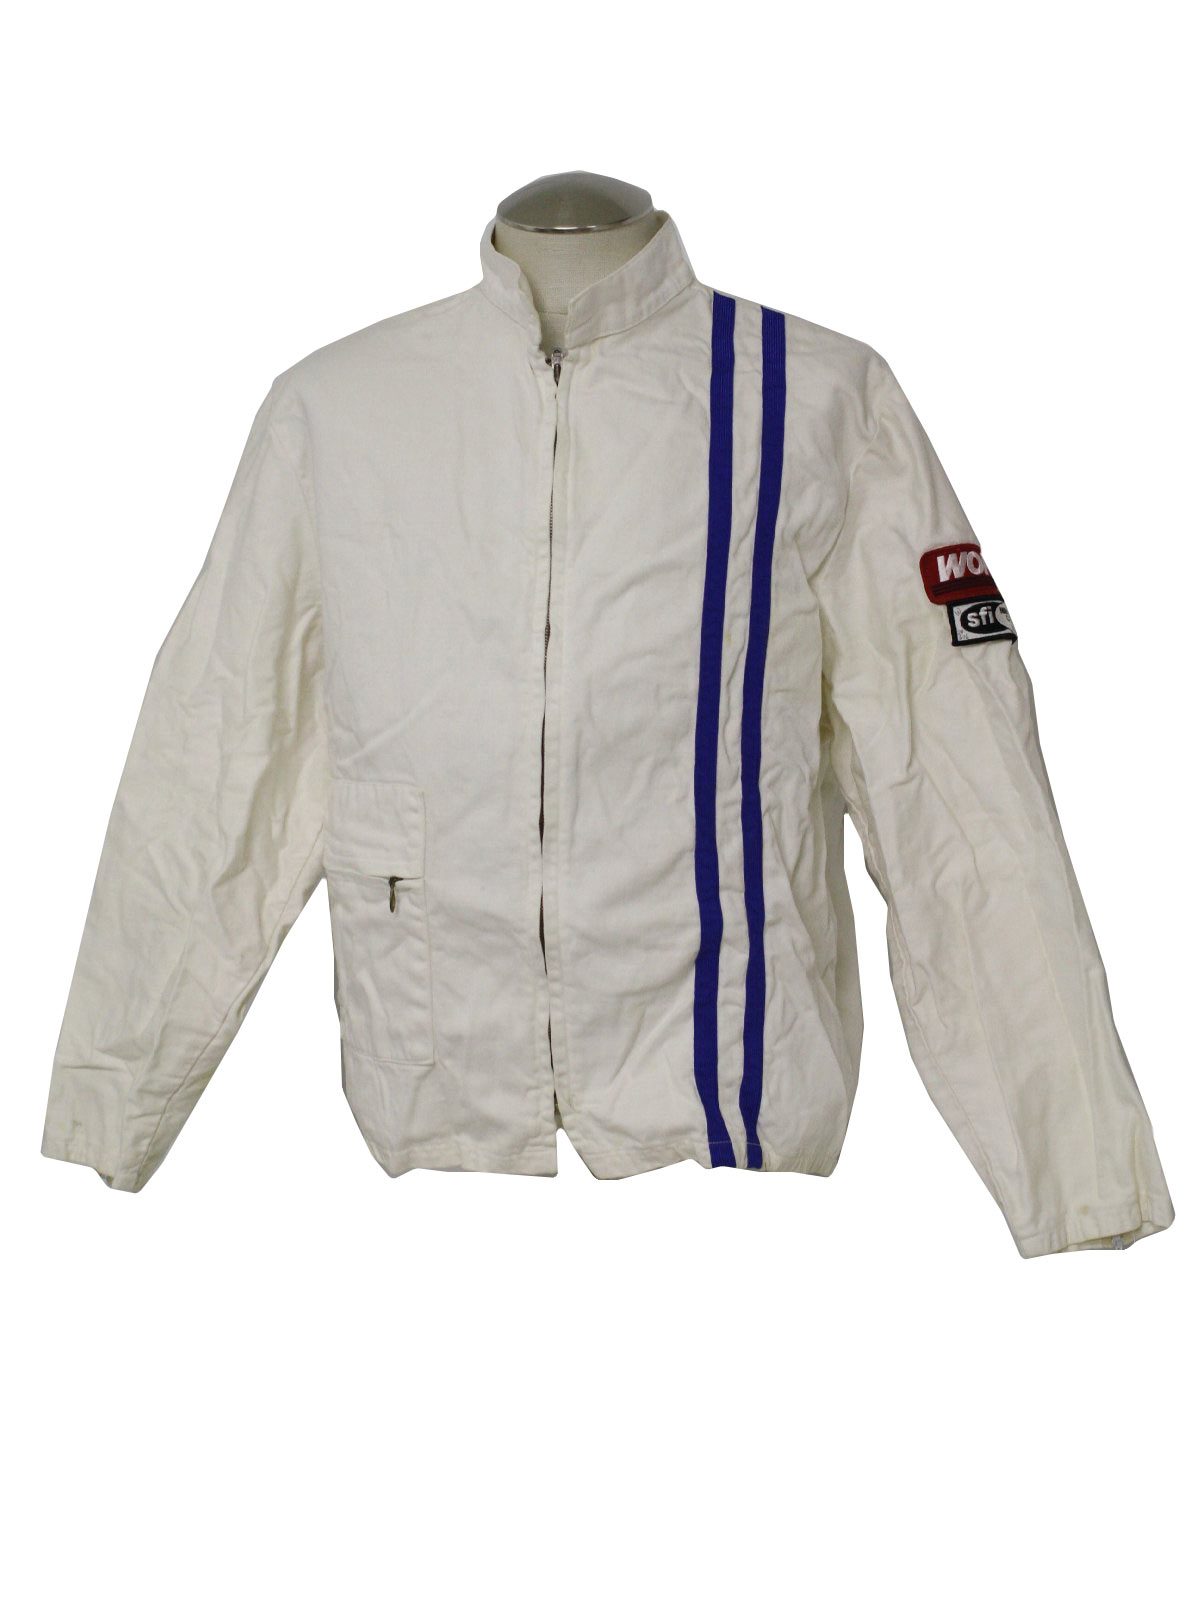 Retro 1970's Jacket (Worth) : 70s -Worth- Mens white, blue, red and ...